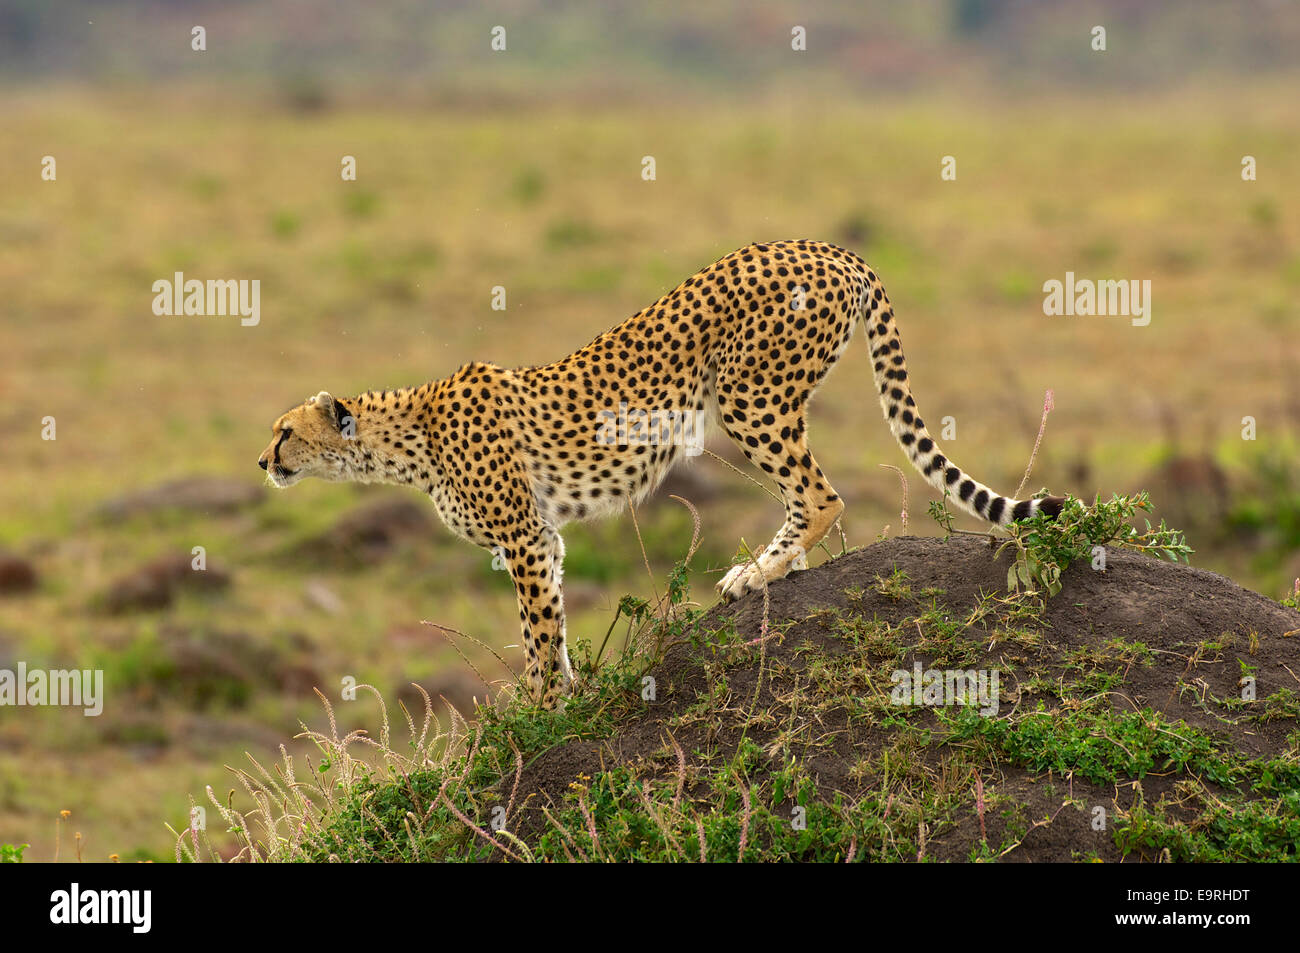 A cheetah in its prime, having identified a potential prey from a vantage point, ready to run, all muscles in tension. Stock Photo